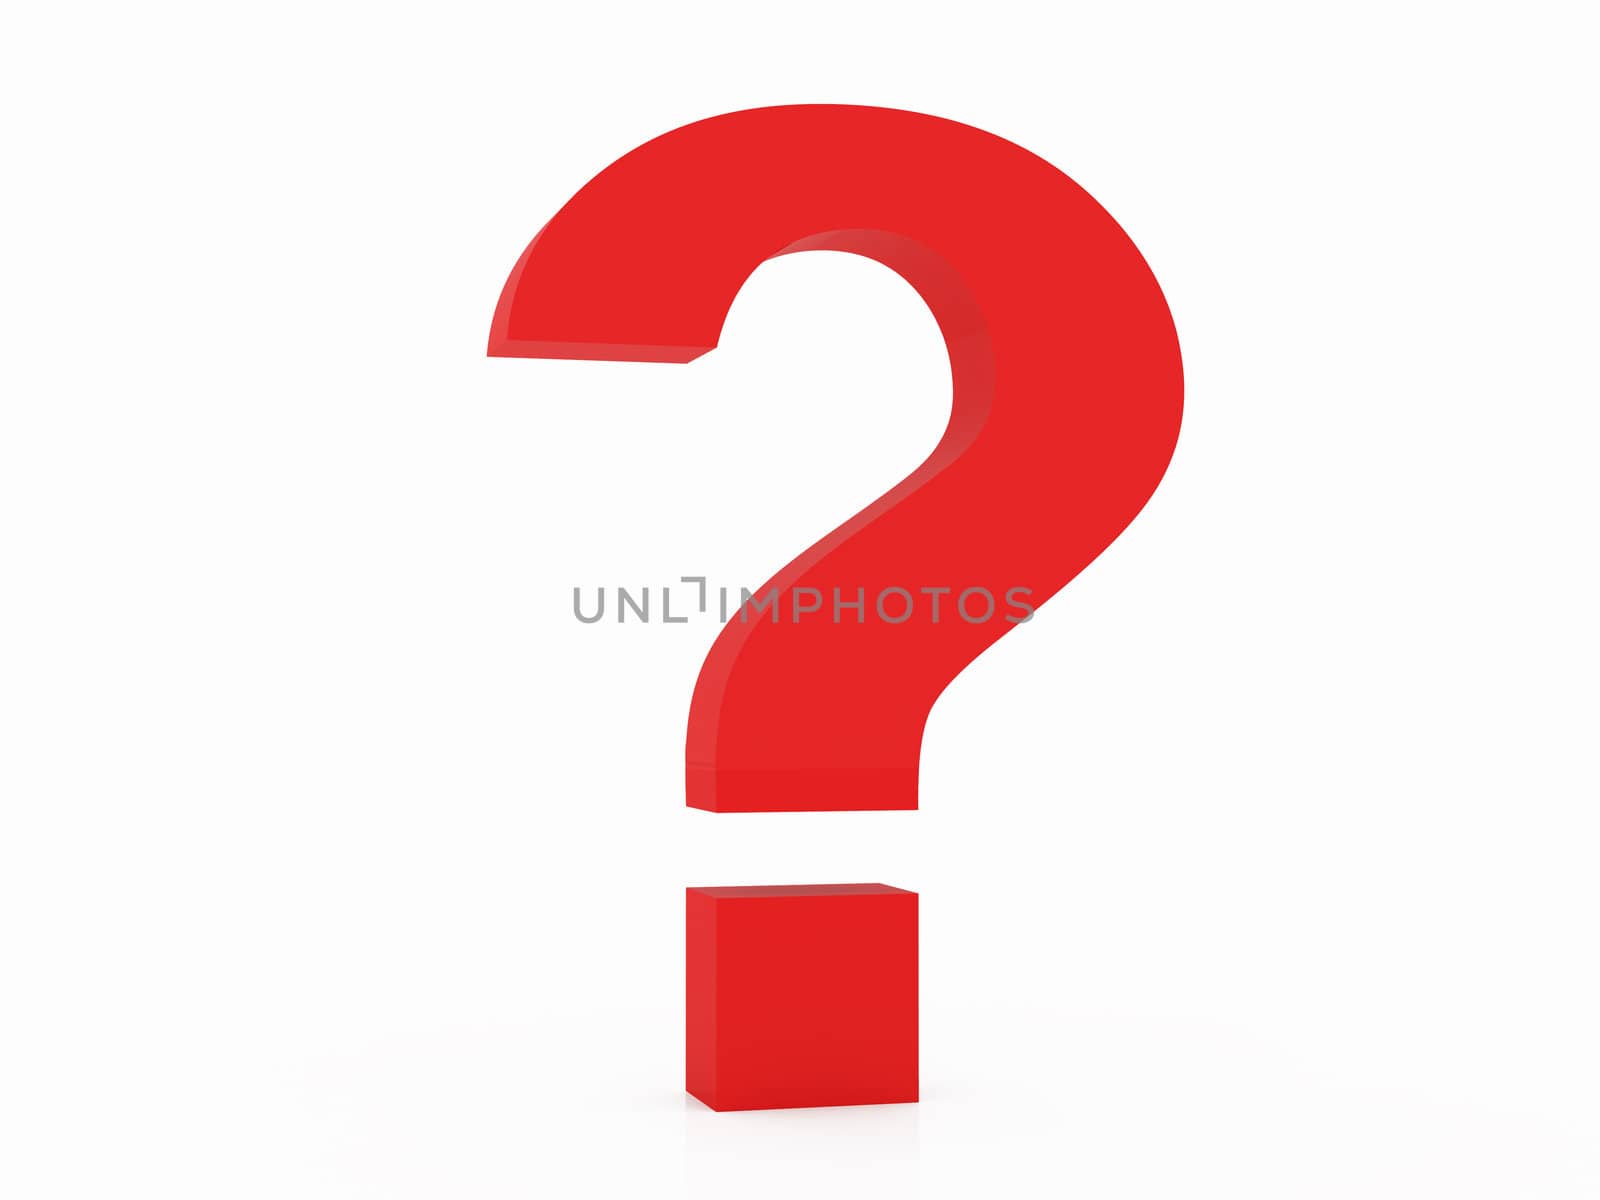 Red, three dimensional shape question mark on white background.